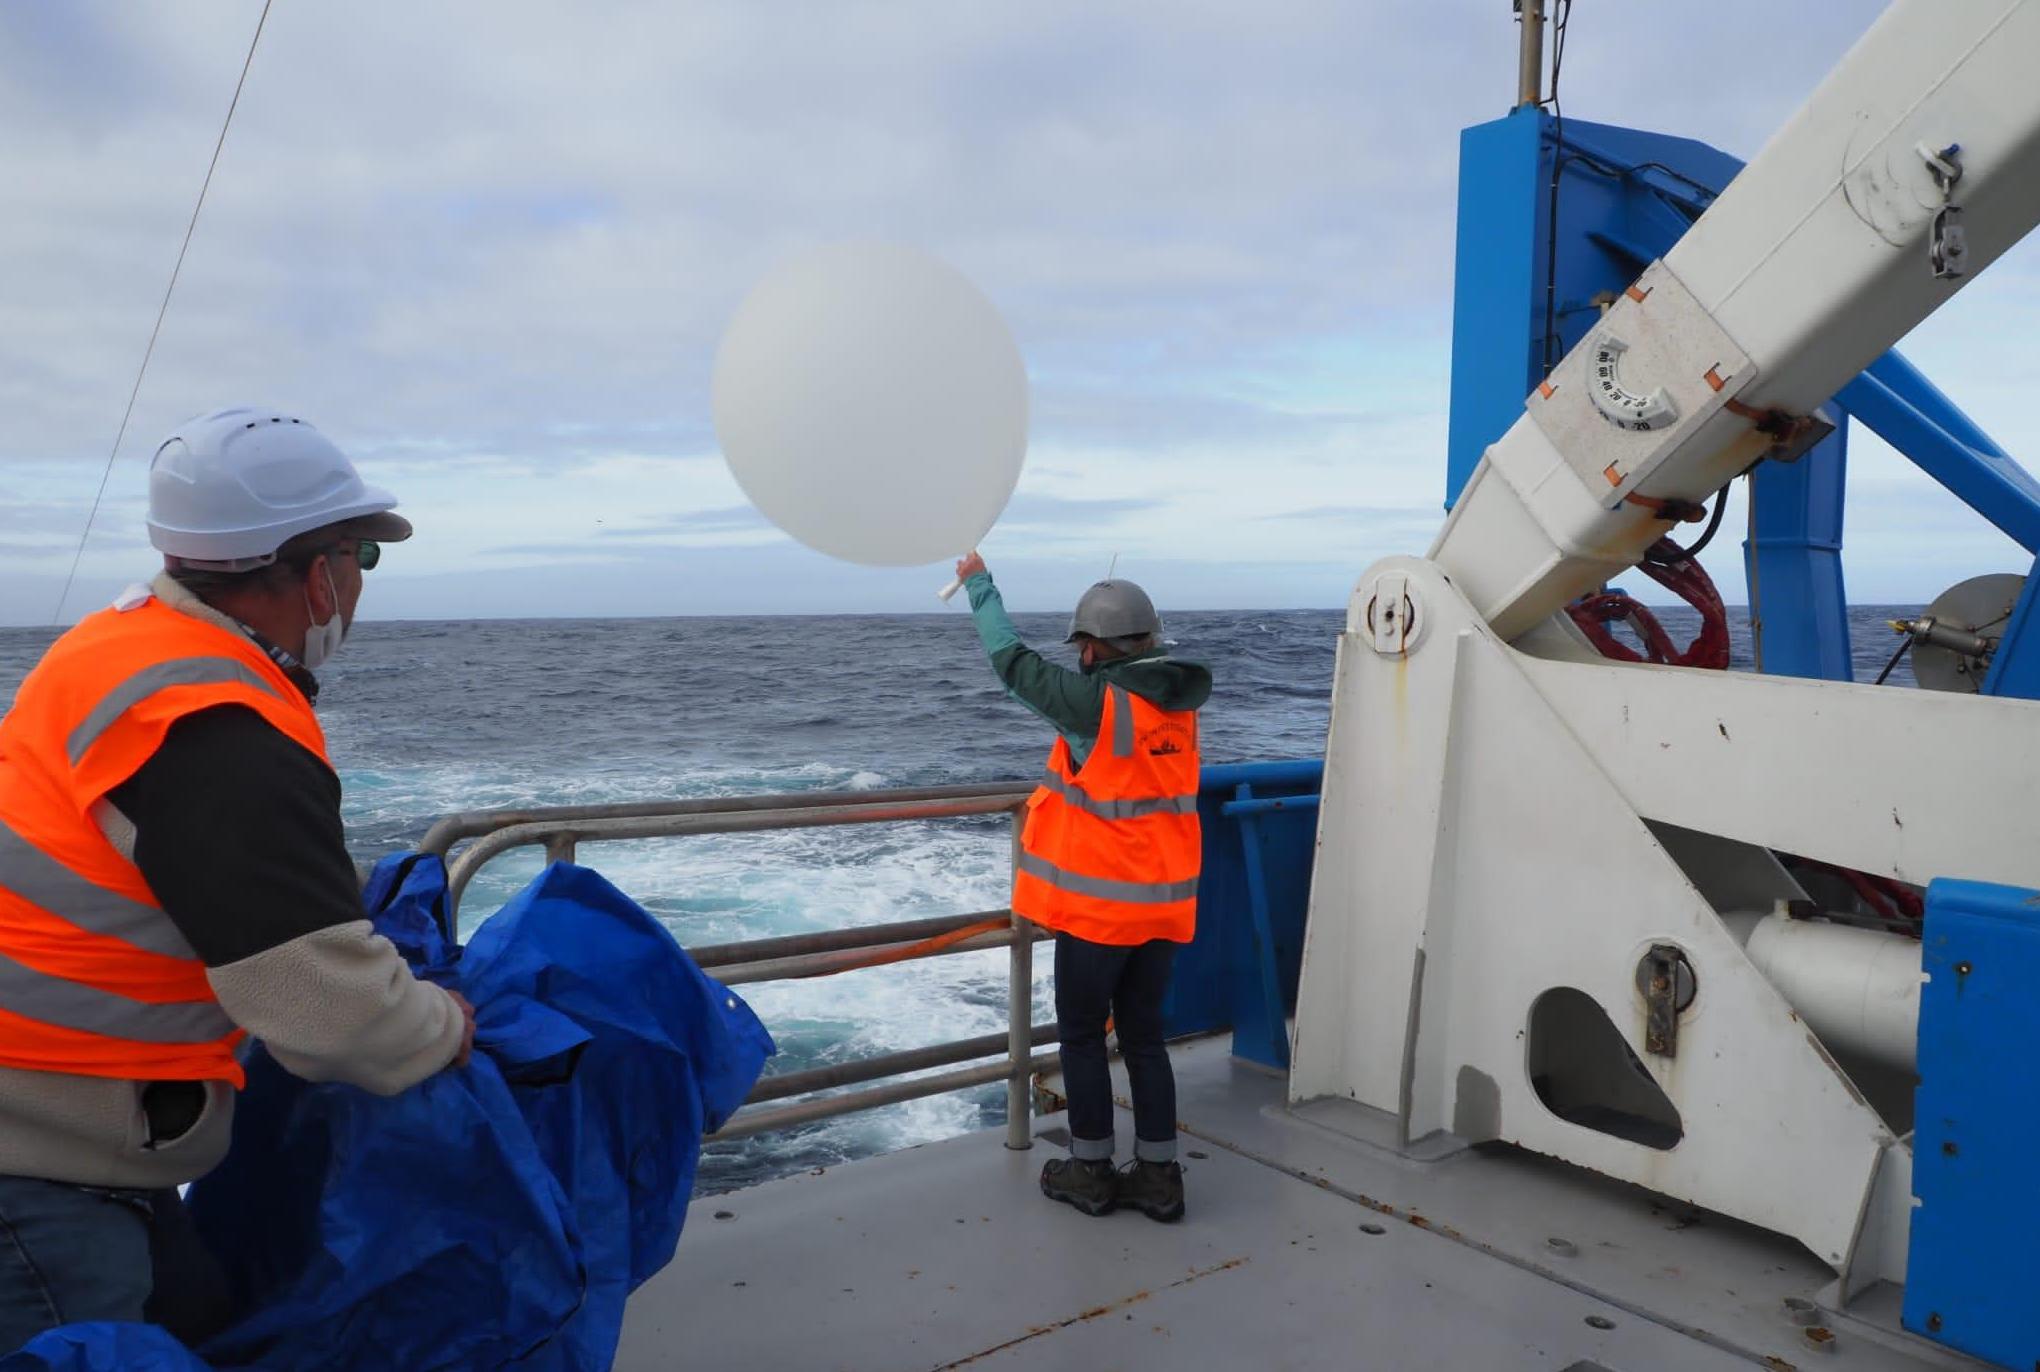 Kelsey stands at the ship's rail holding aloft a large white weather balloon, preparing to launch it into the atmosphere.